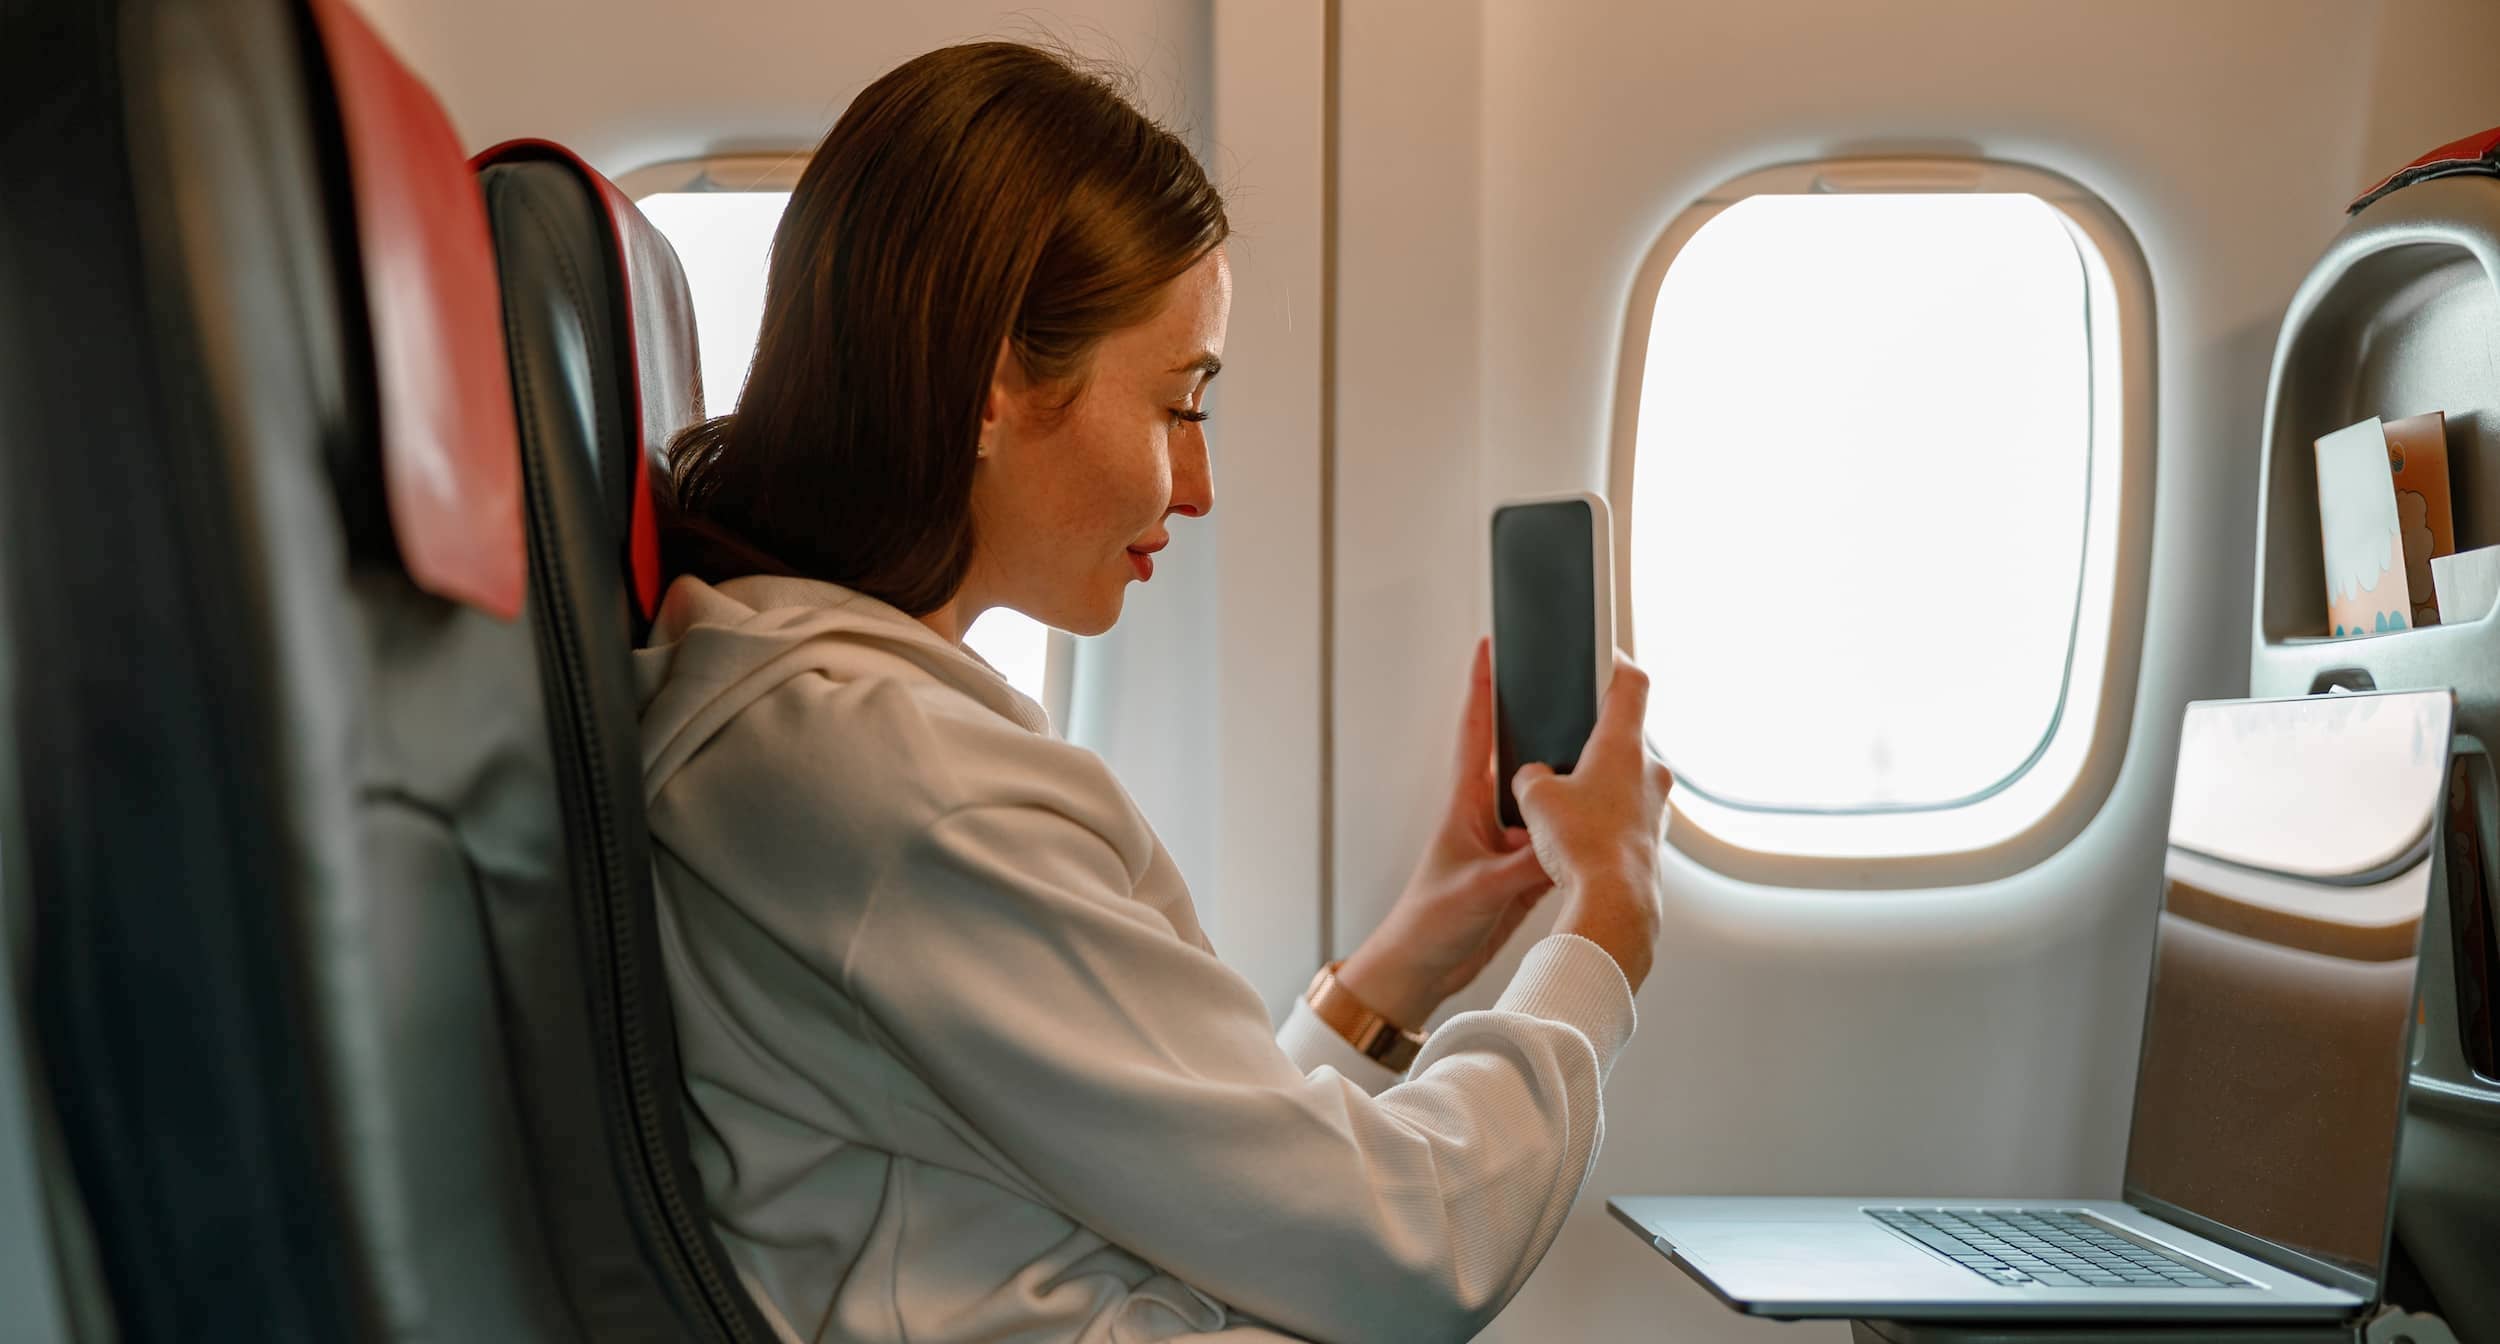 Woman using a cool iPhone accessory on a plane.